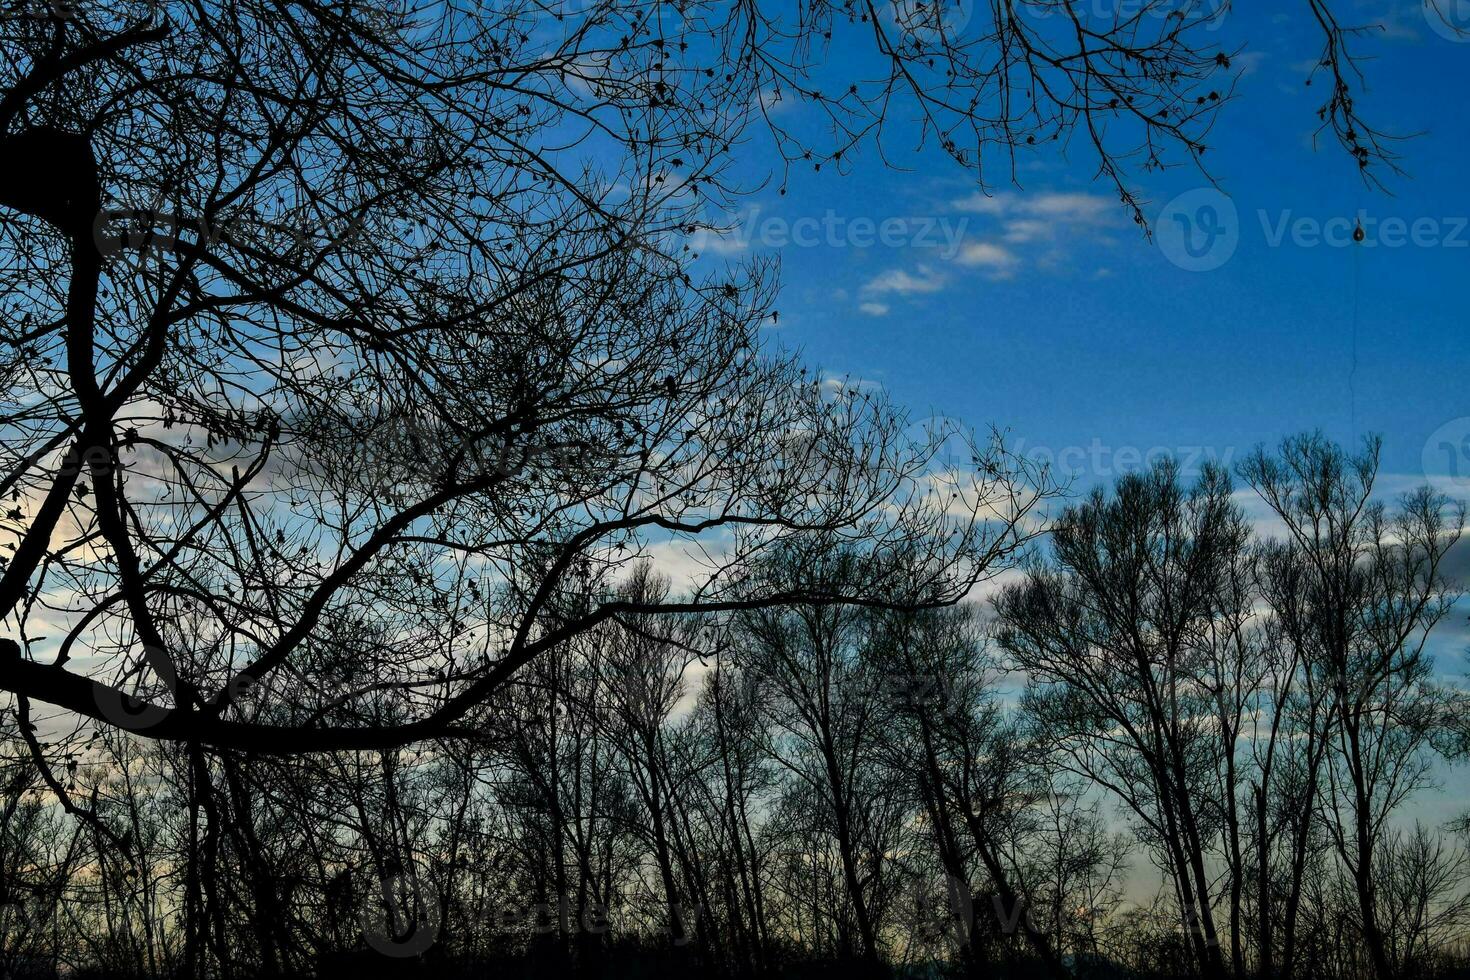 trees with no leaves in front of a blue sky photo